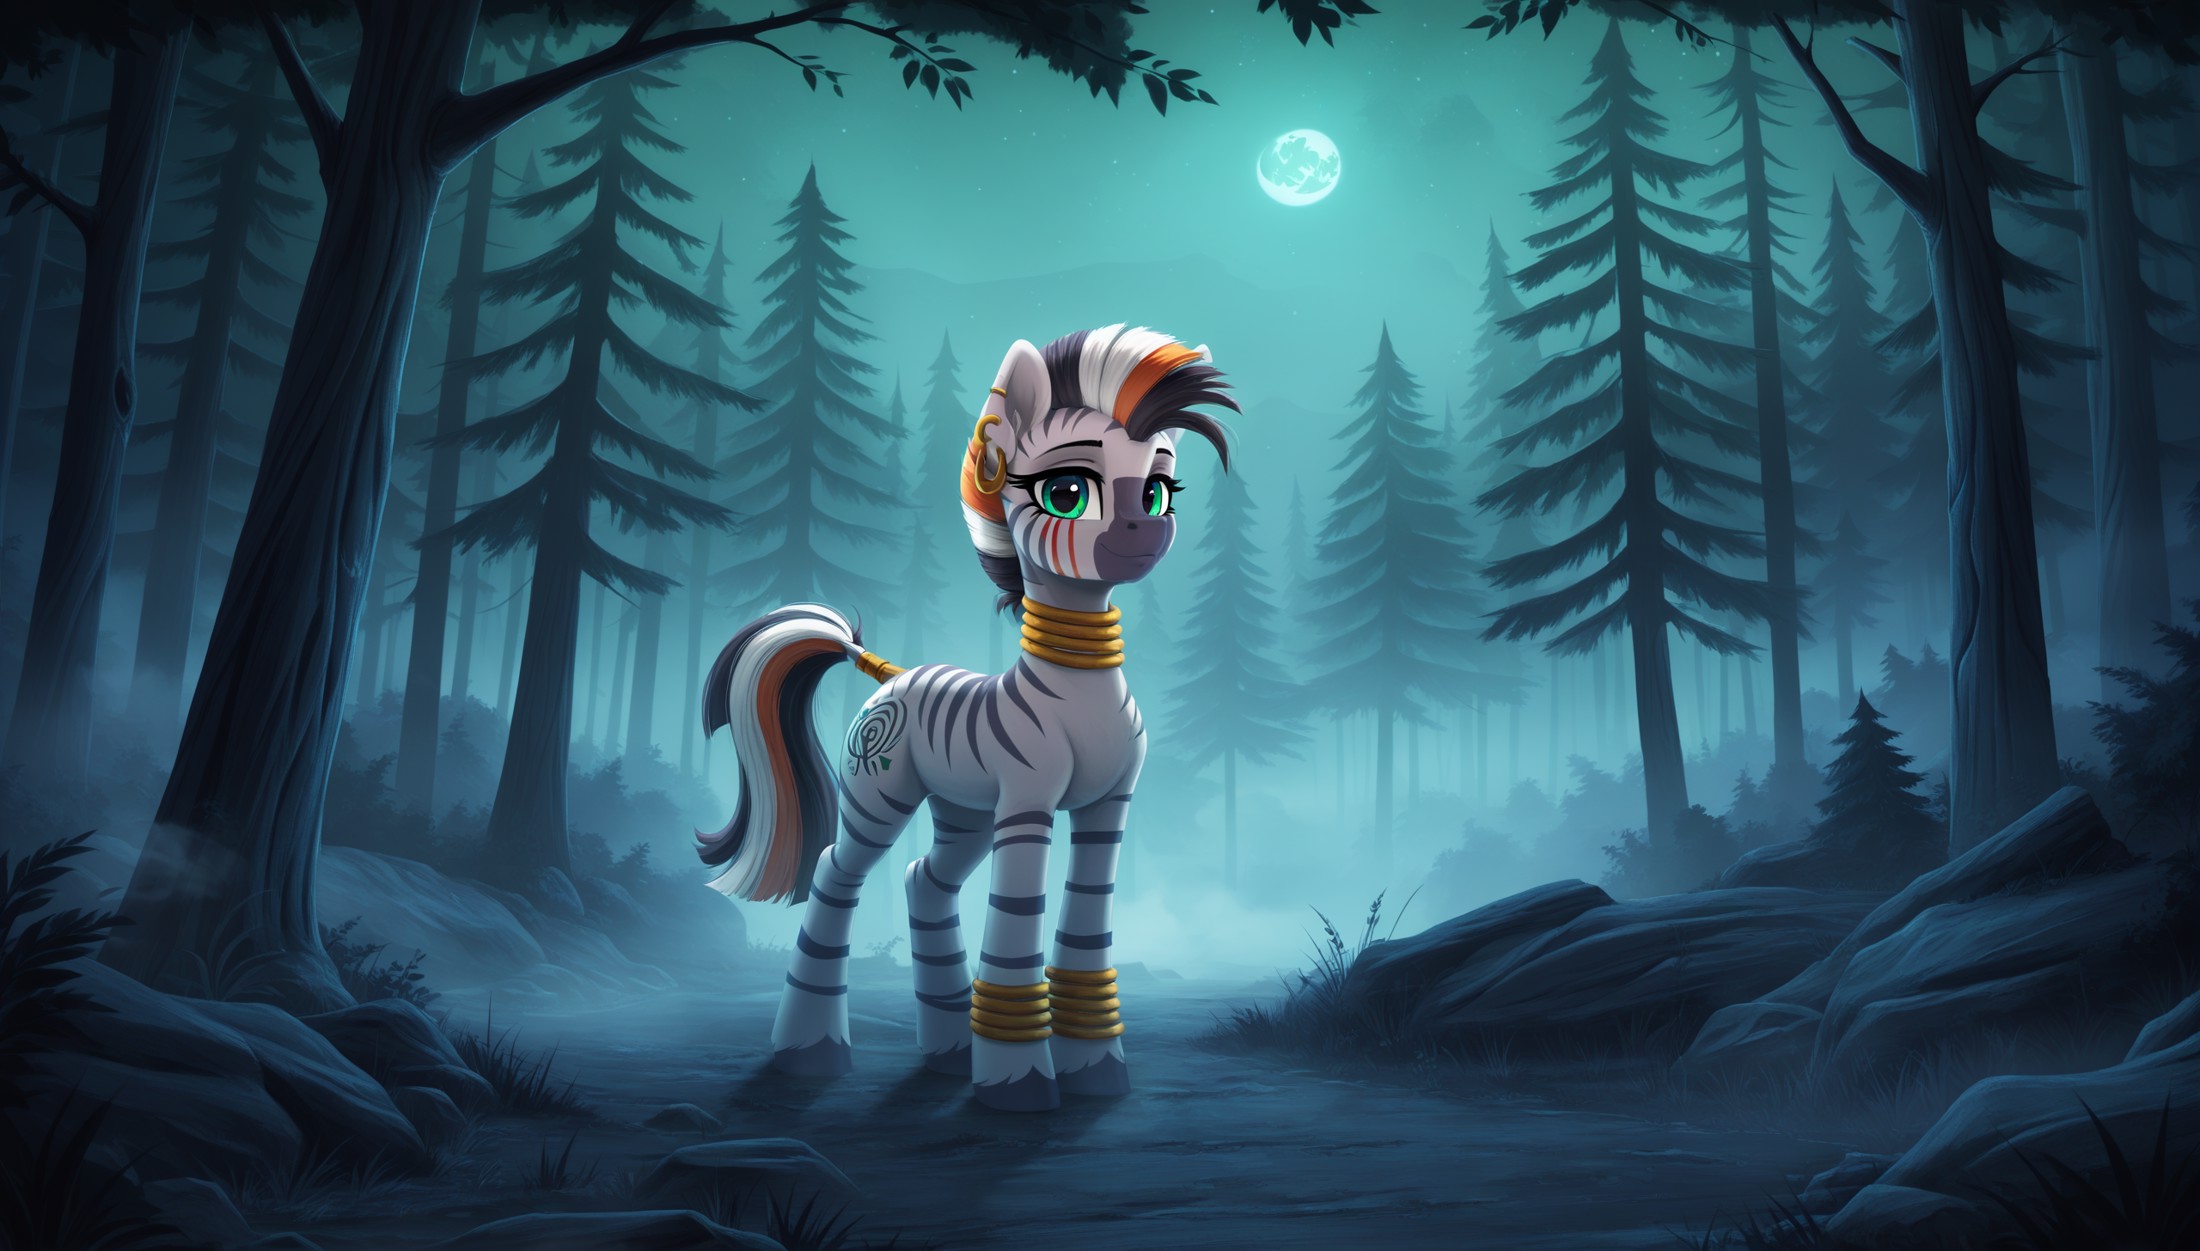 score_9, score_8_up, score_7_up, score_6_up, score_5_up, score_4_up, rating_safe, pony, solo, zebra, earring, everfree for...